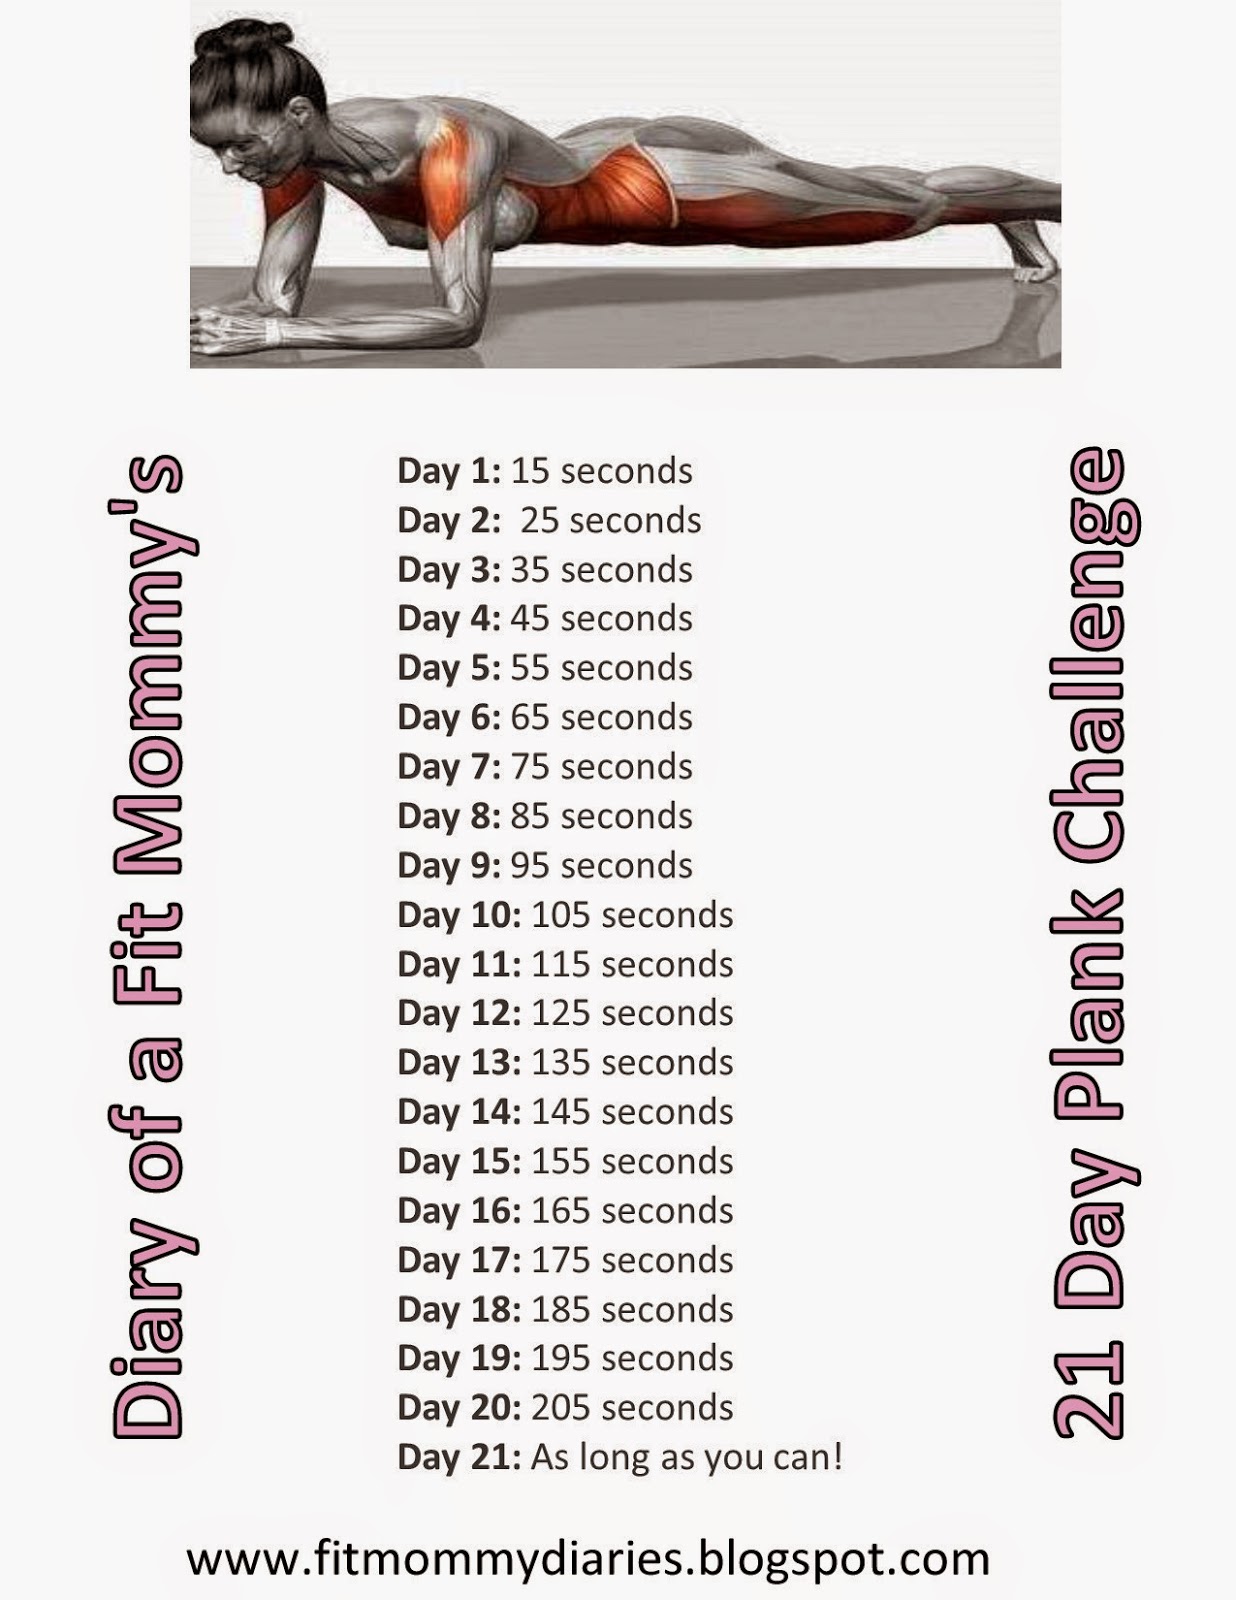 Diary of a Fit Mommy: 21 Day Plank Challenge